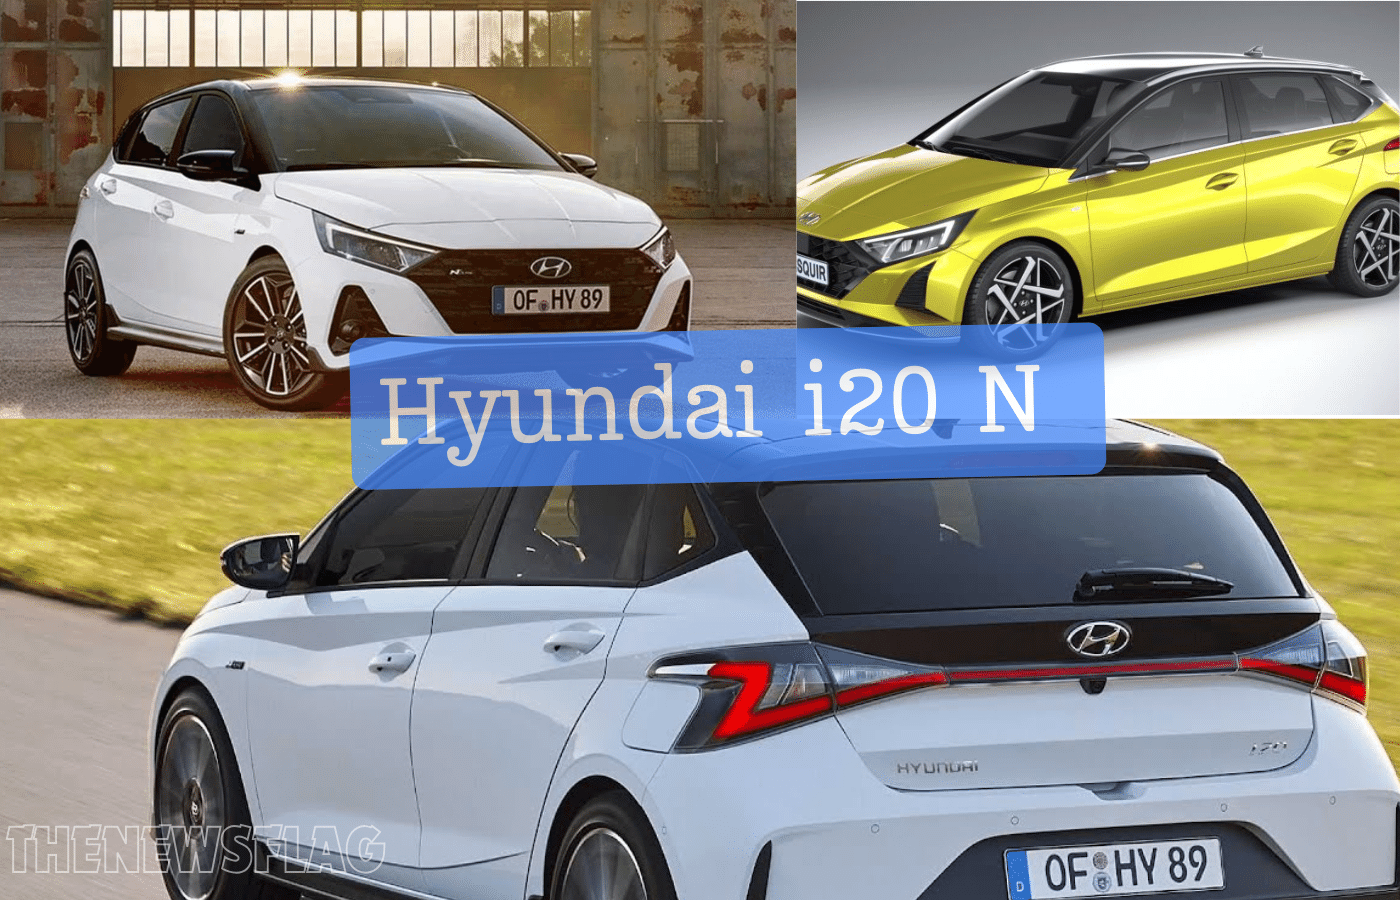 Check Out the Details: Hyundai's i20 N Line and Venue N Line Achieved 22K+ Sales Mark.